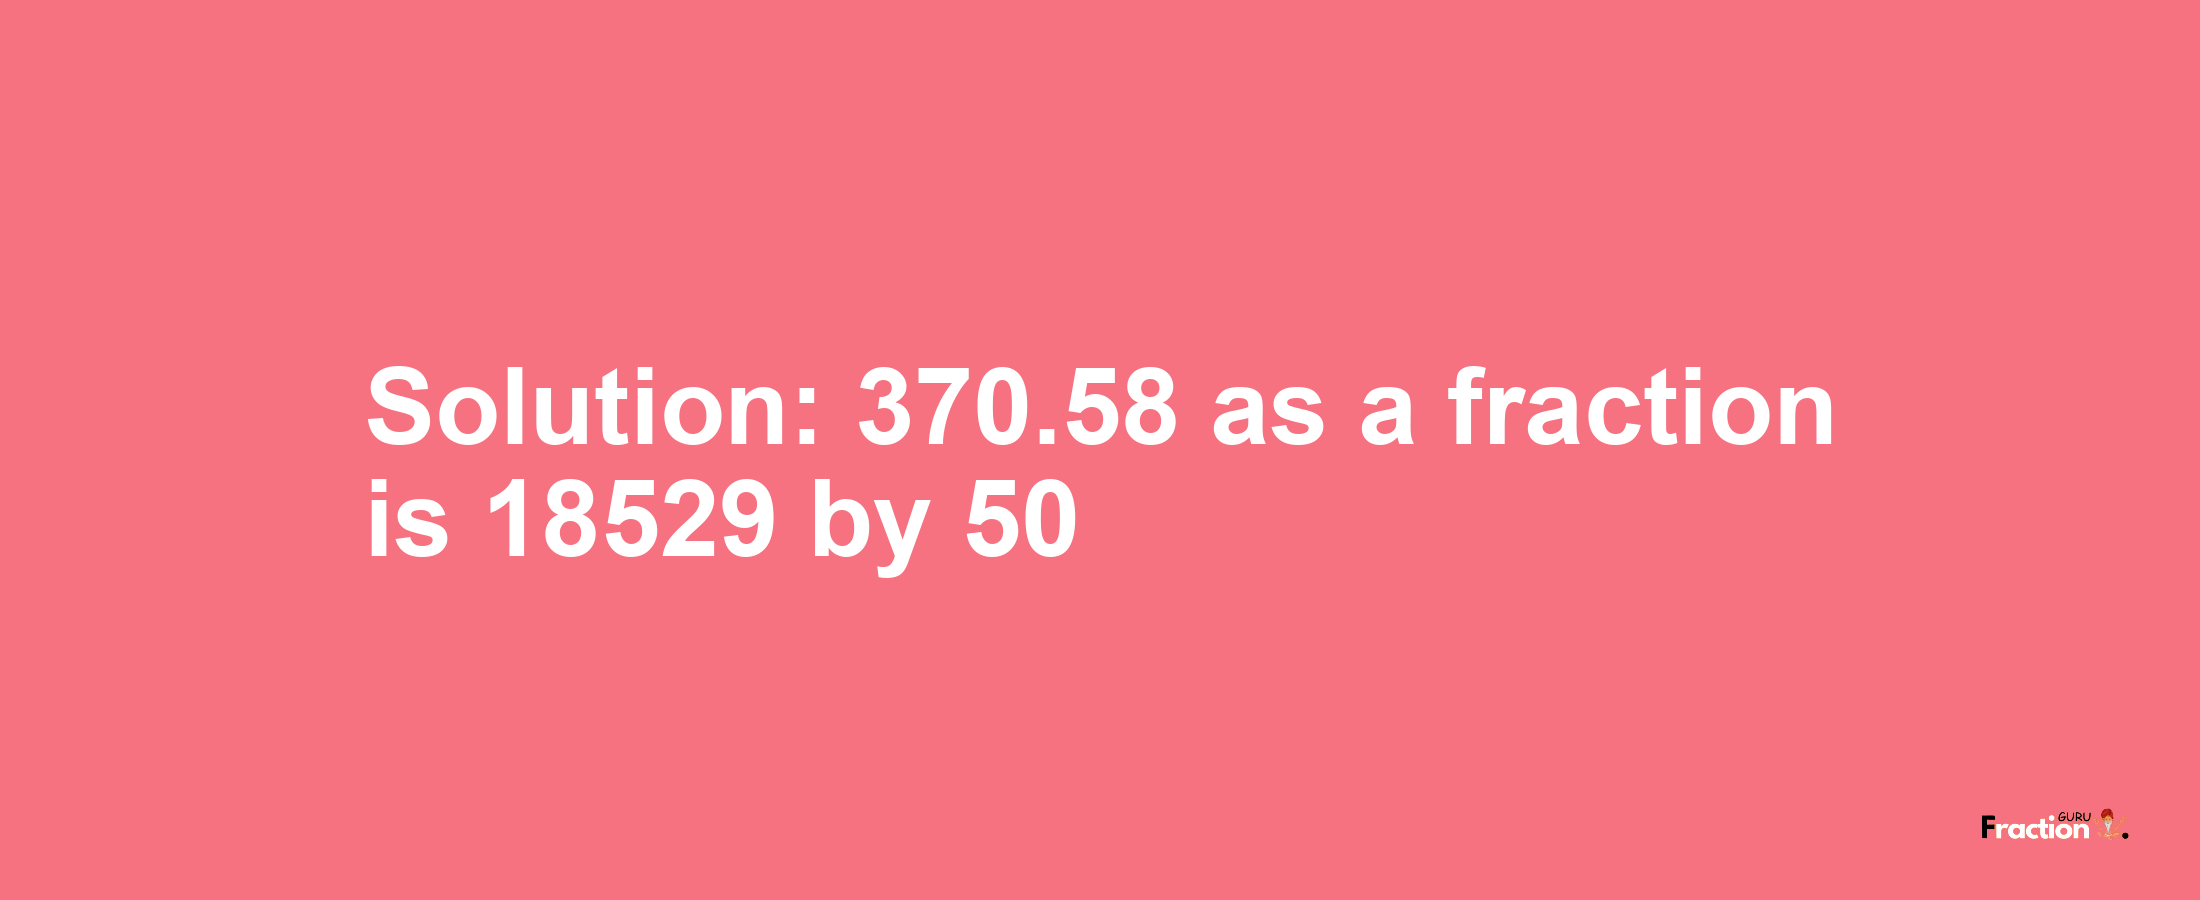 Solution:370.58 as a fraction is 18529/50